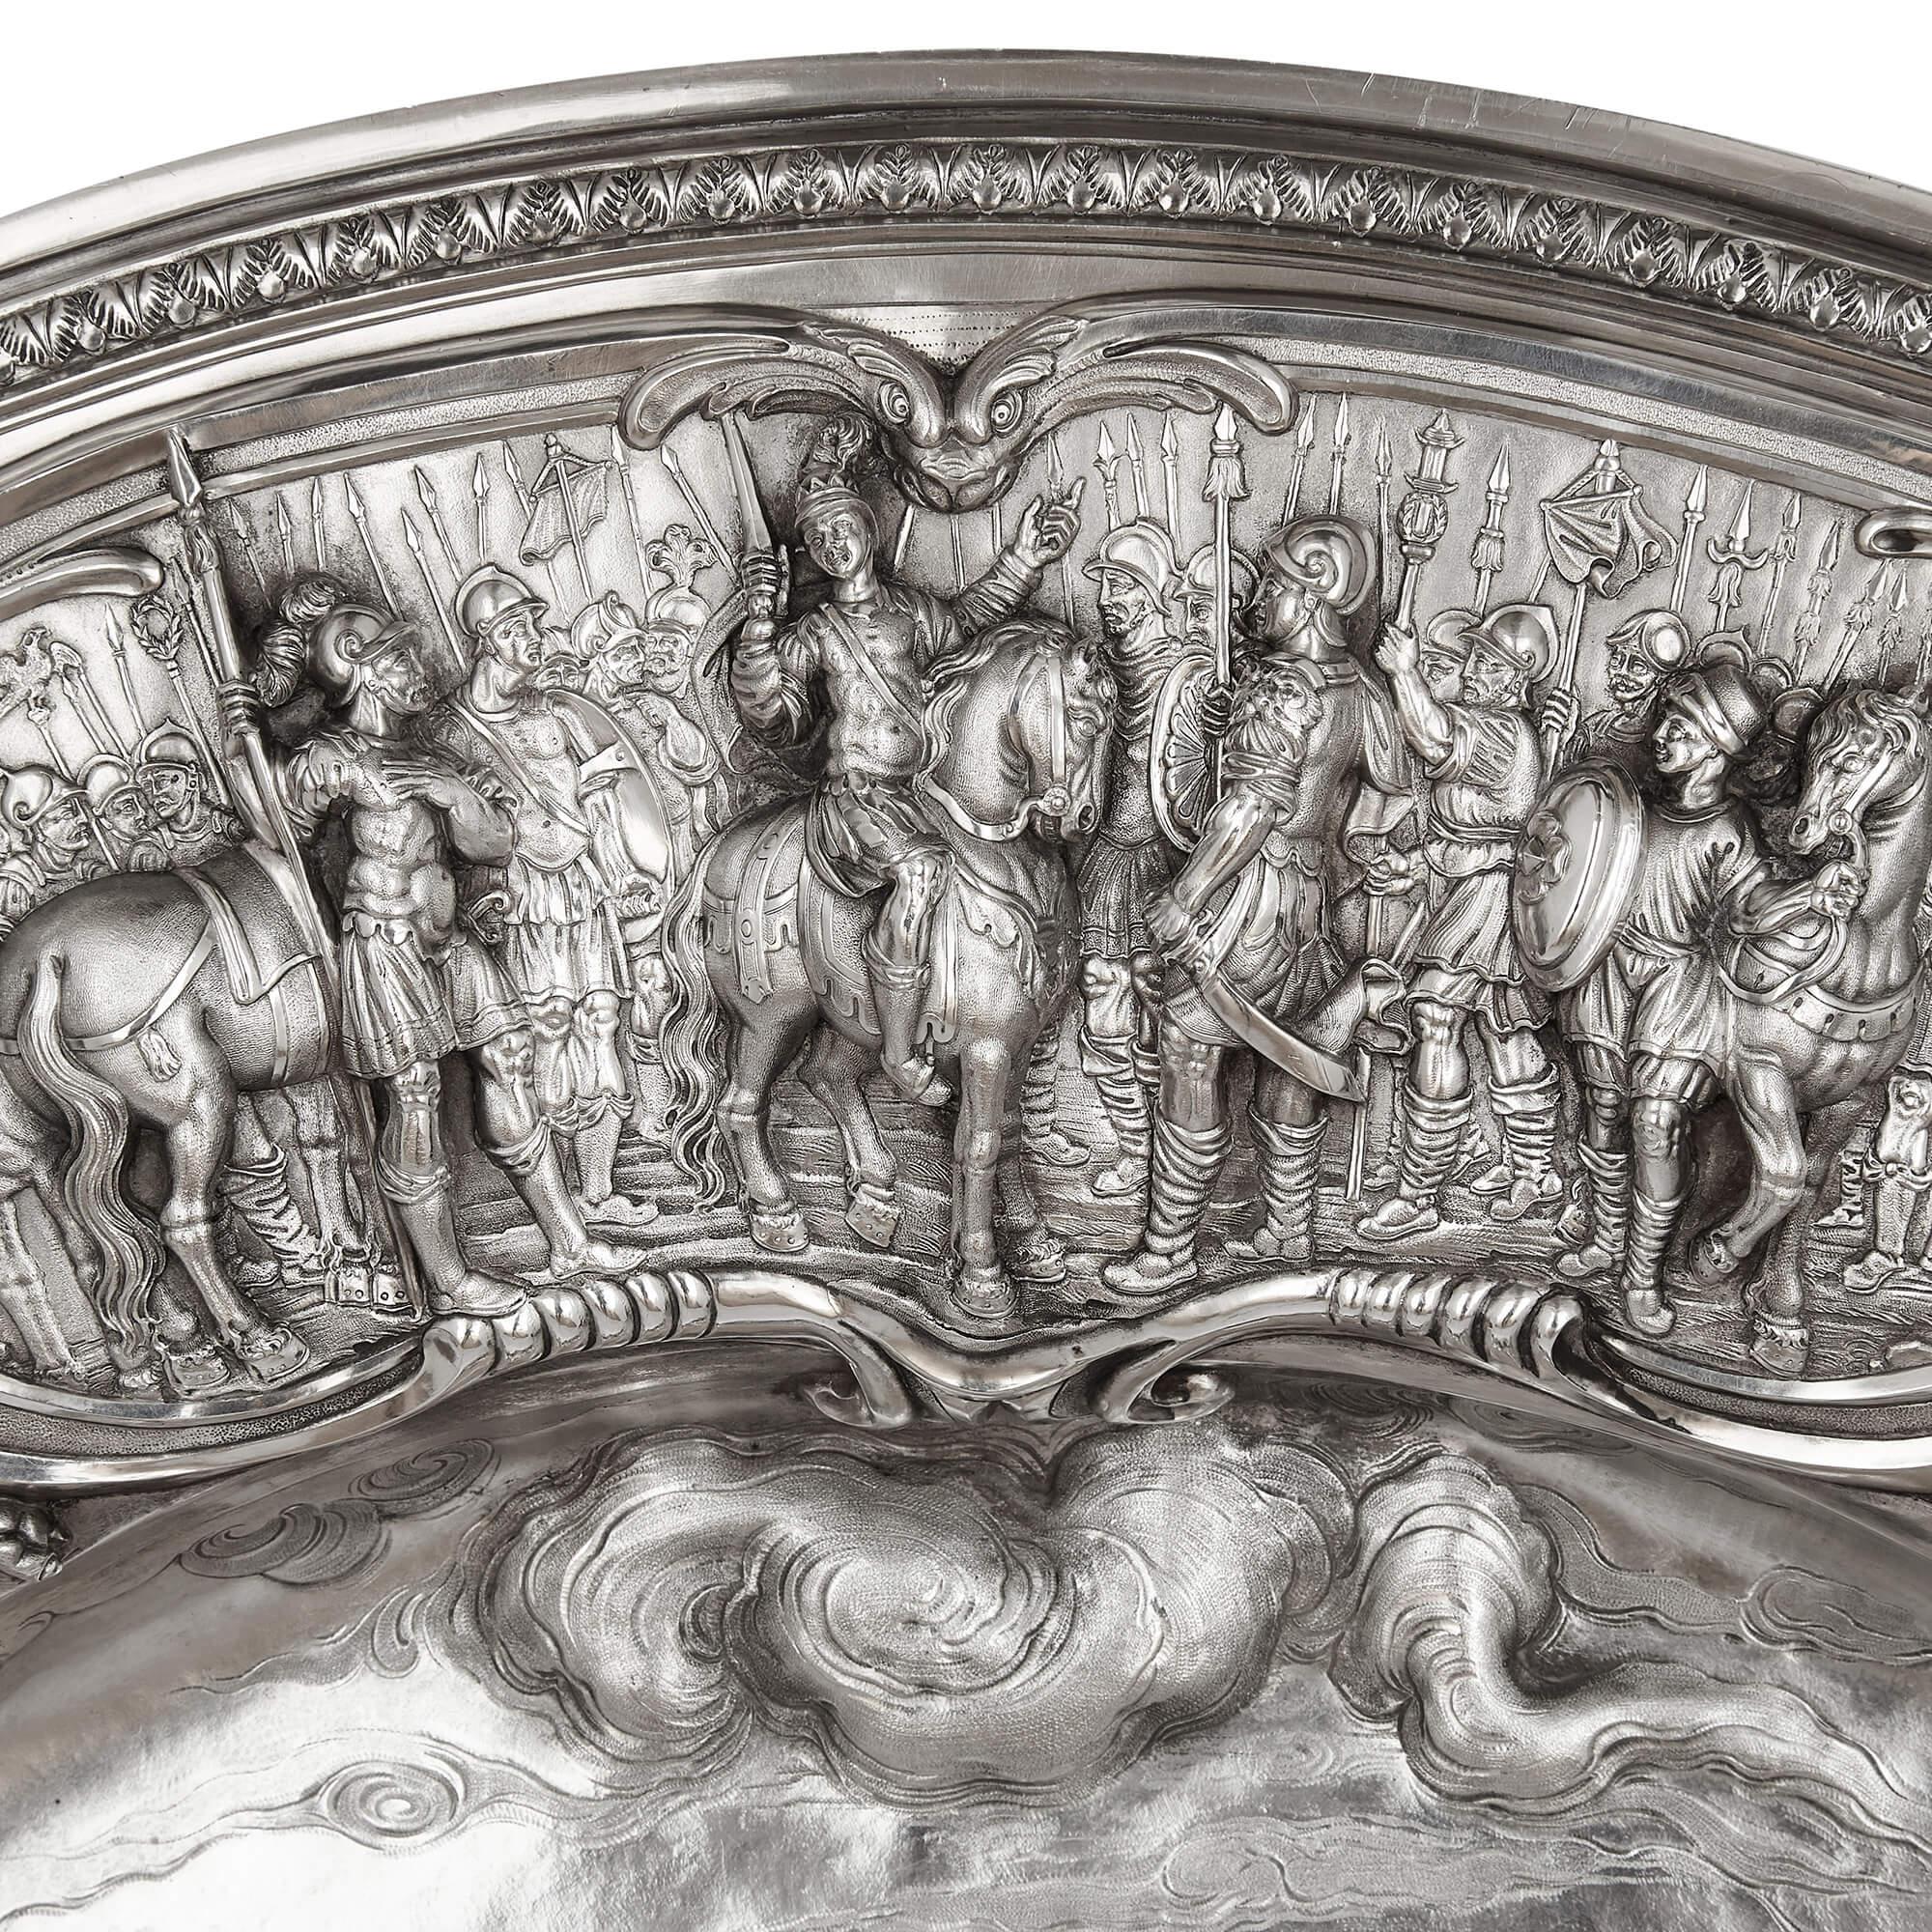 English Large George iv Silver Sideboard Dish, Made by Joseph Angell II, 1828 For Sale